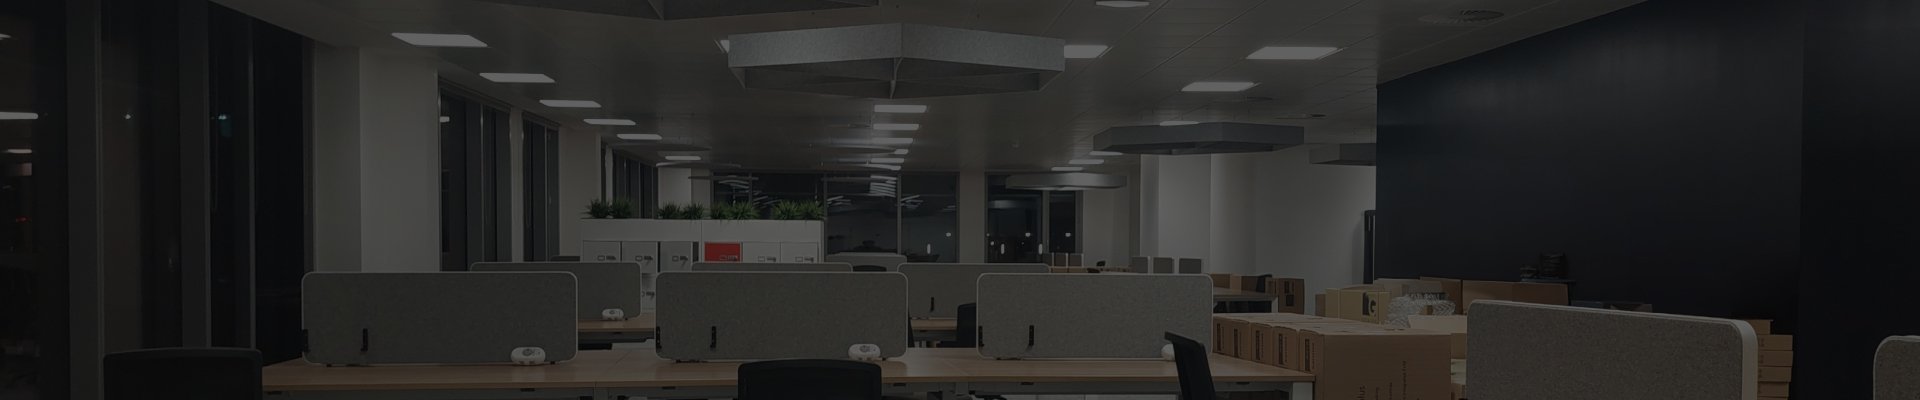 Offices Case Study Banner